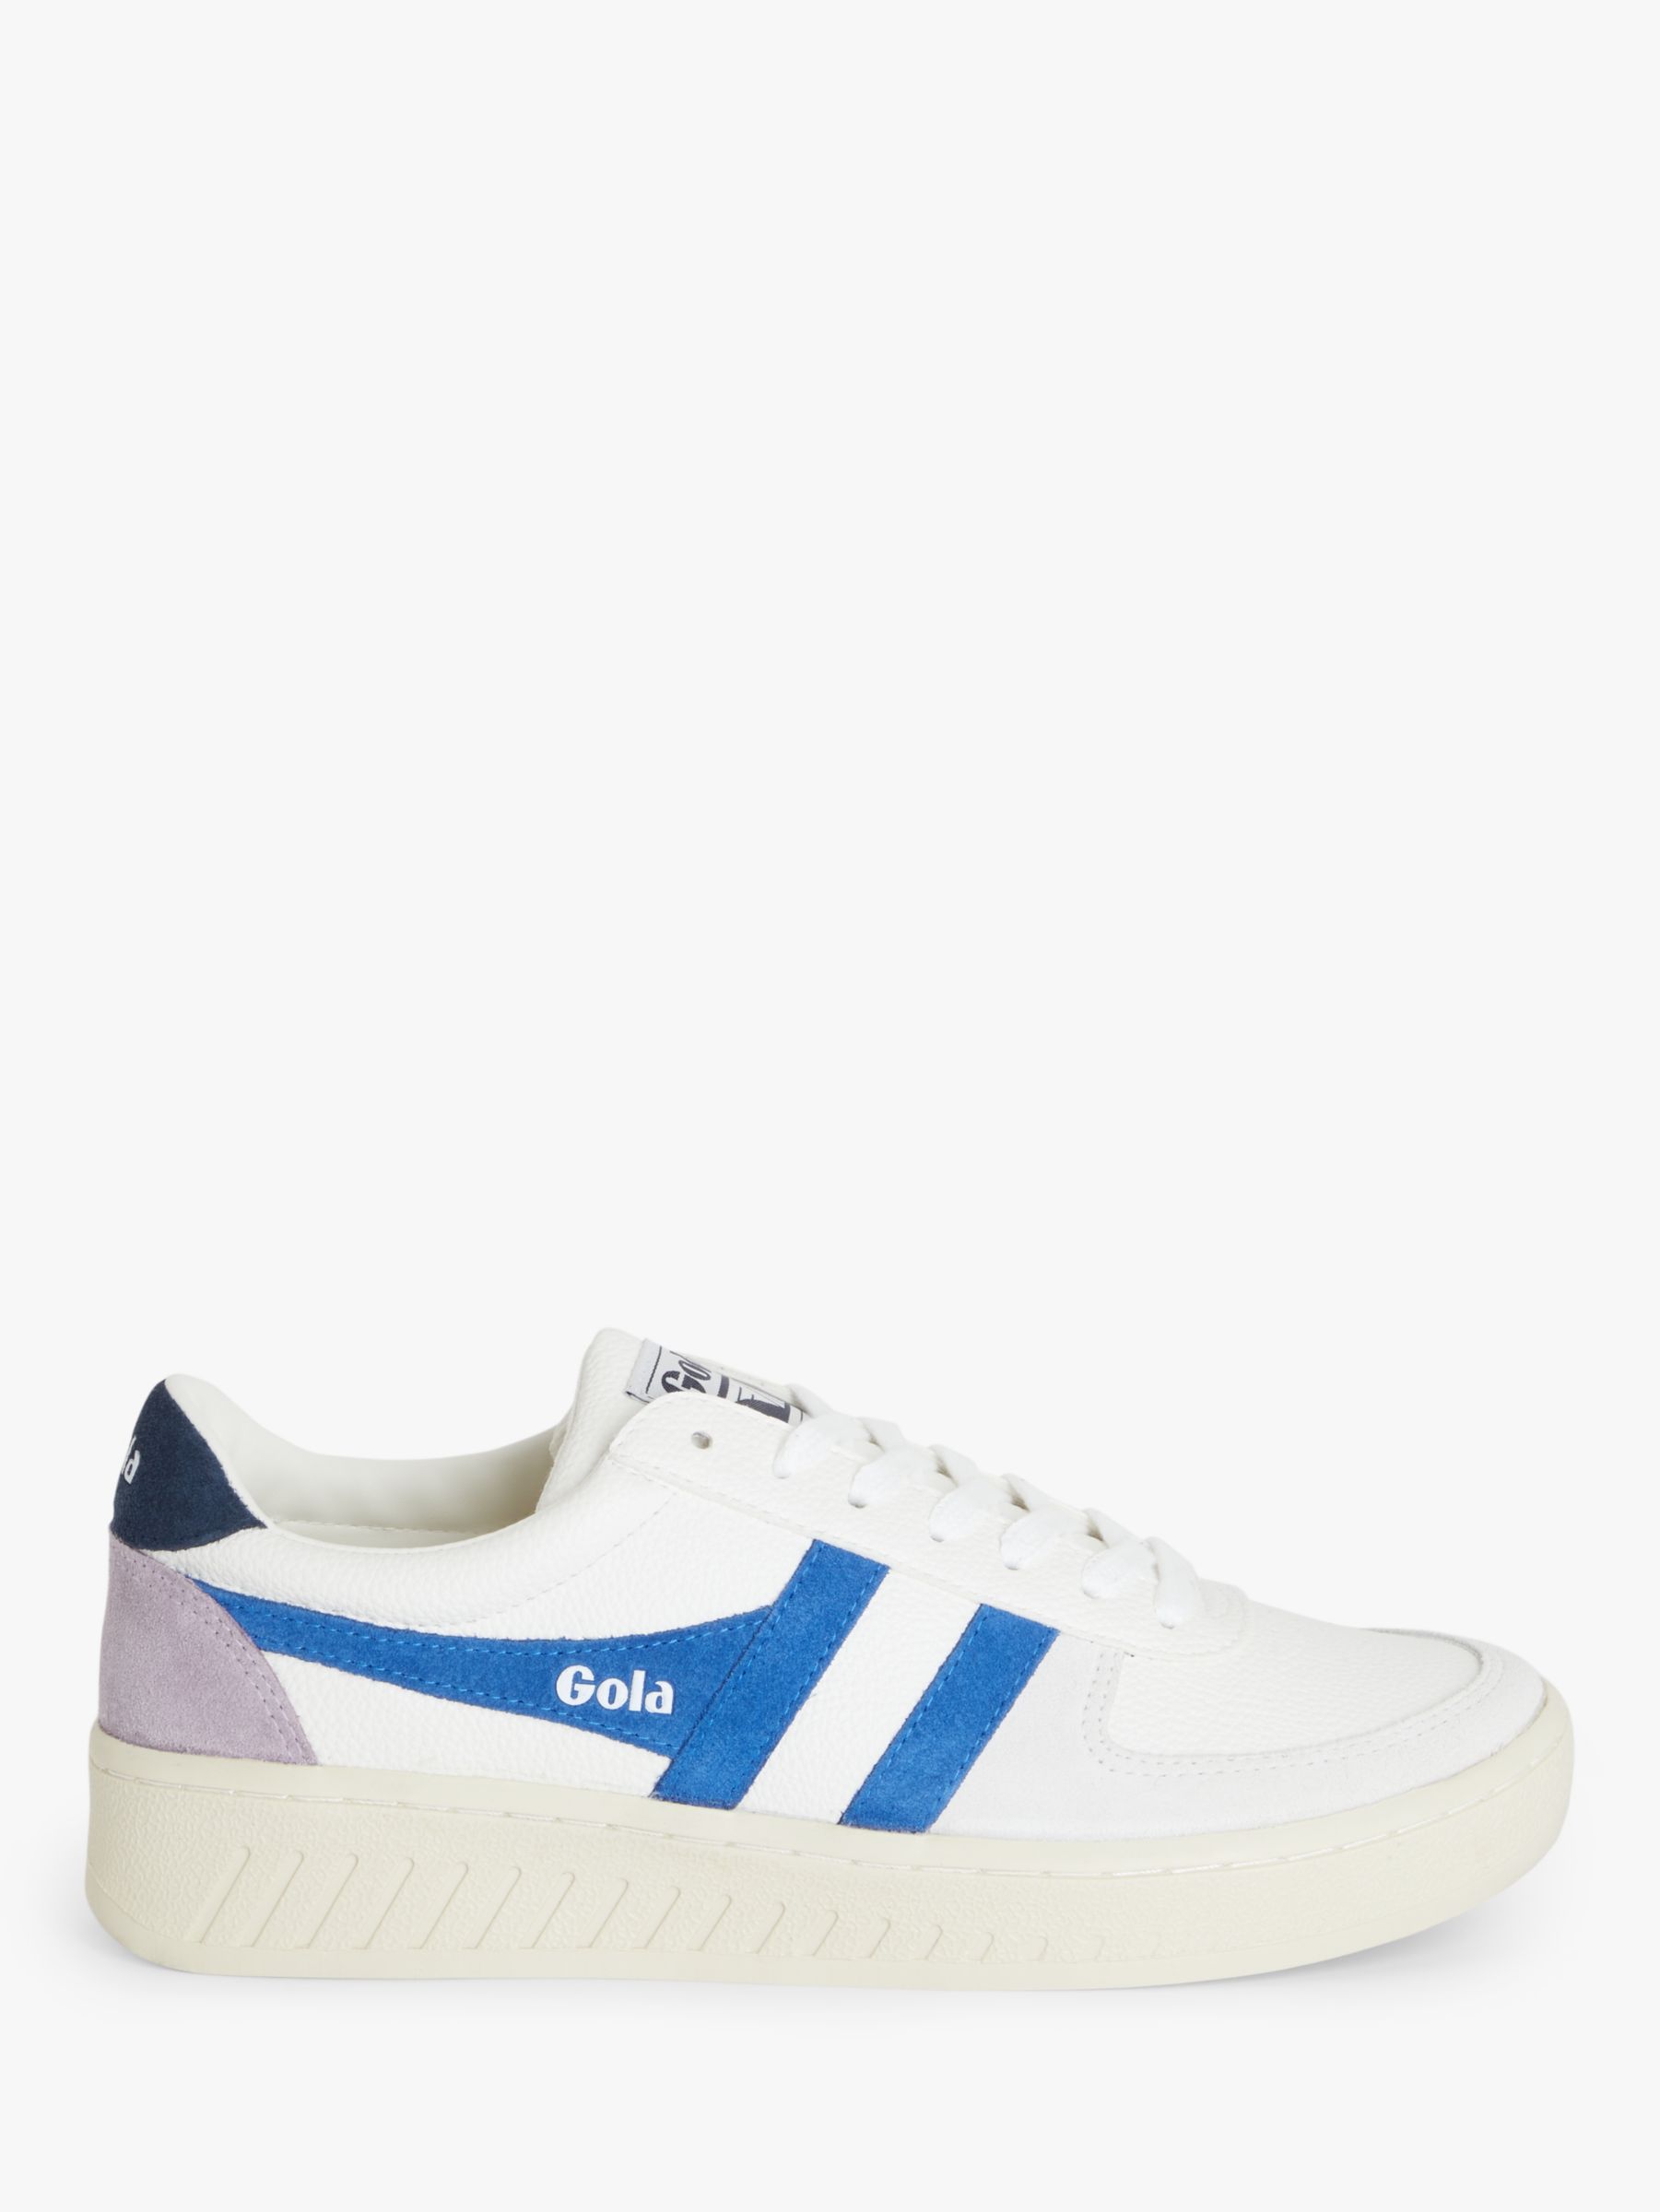 Gola Grandslam Leather Trainers, Sapphire/Navy at John Lewis & Partners